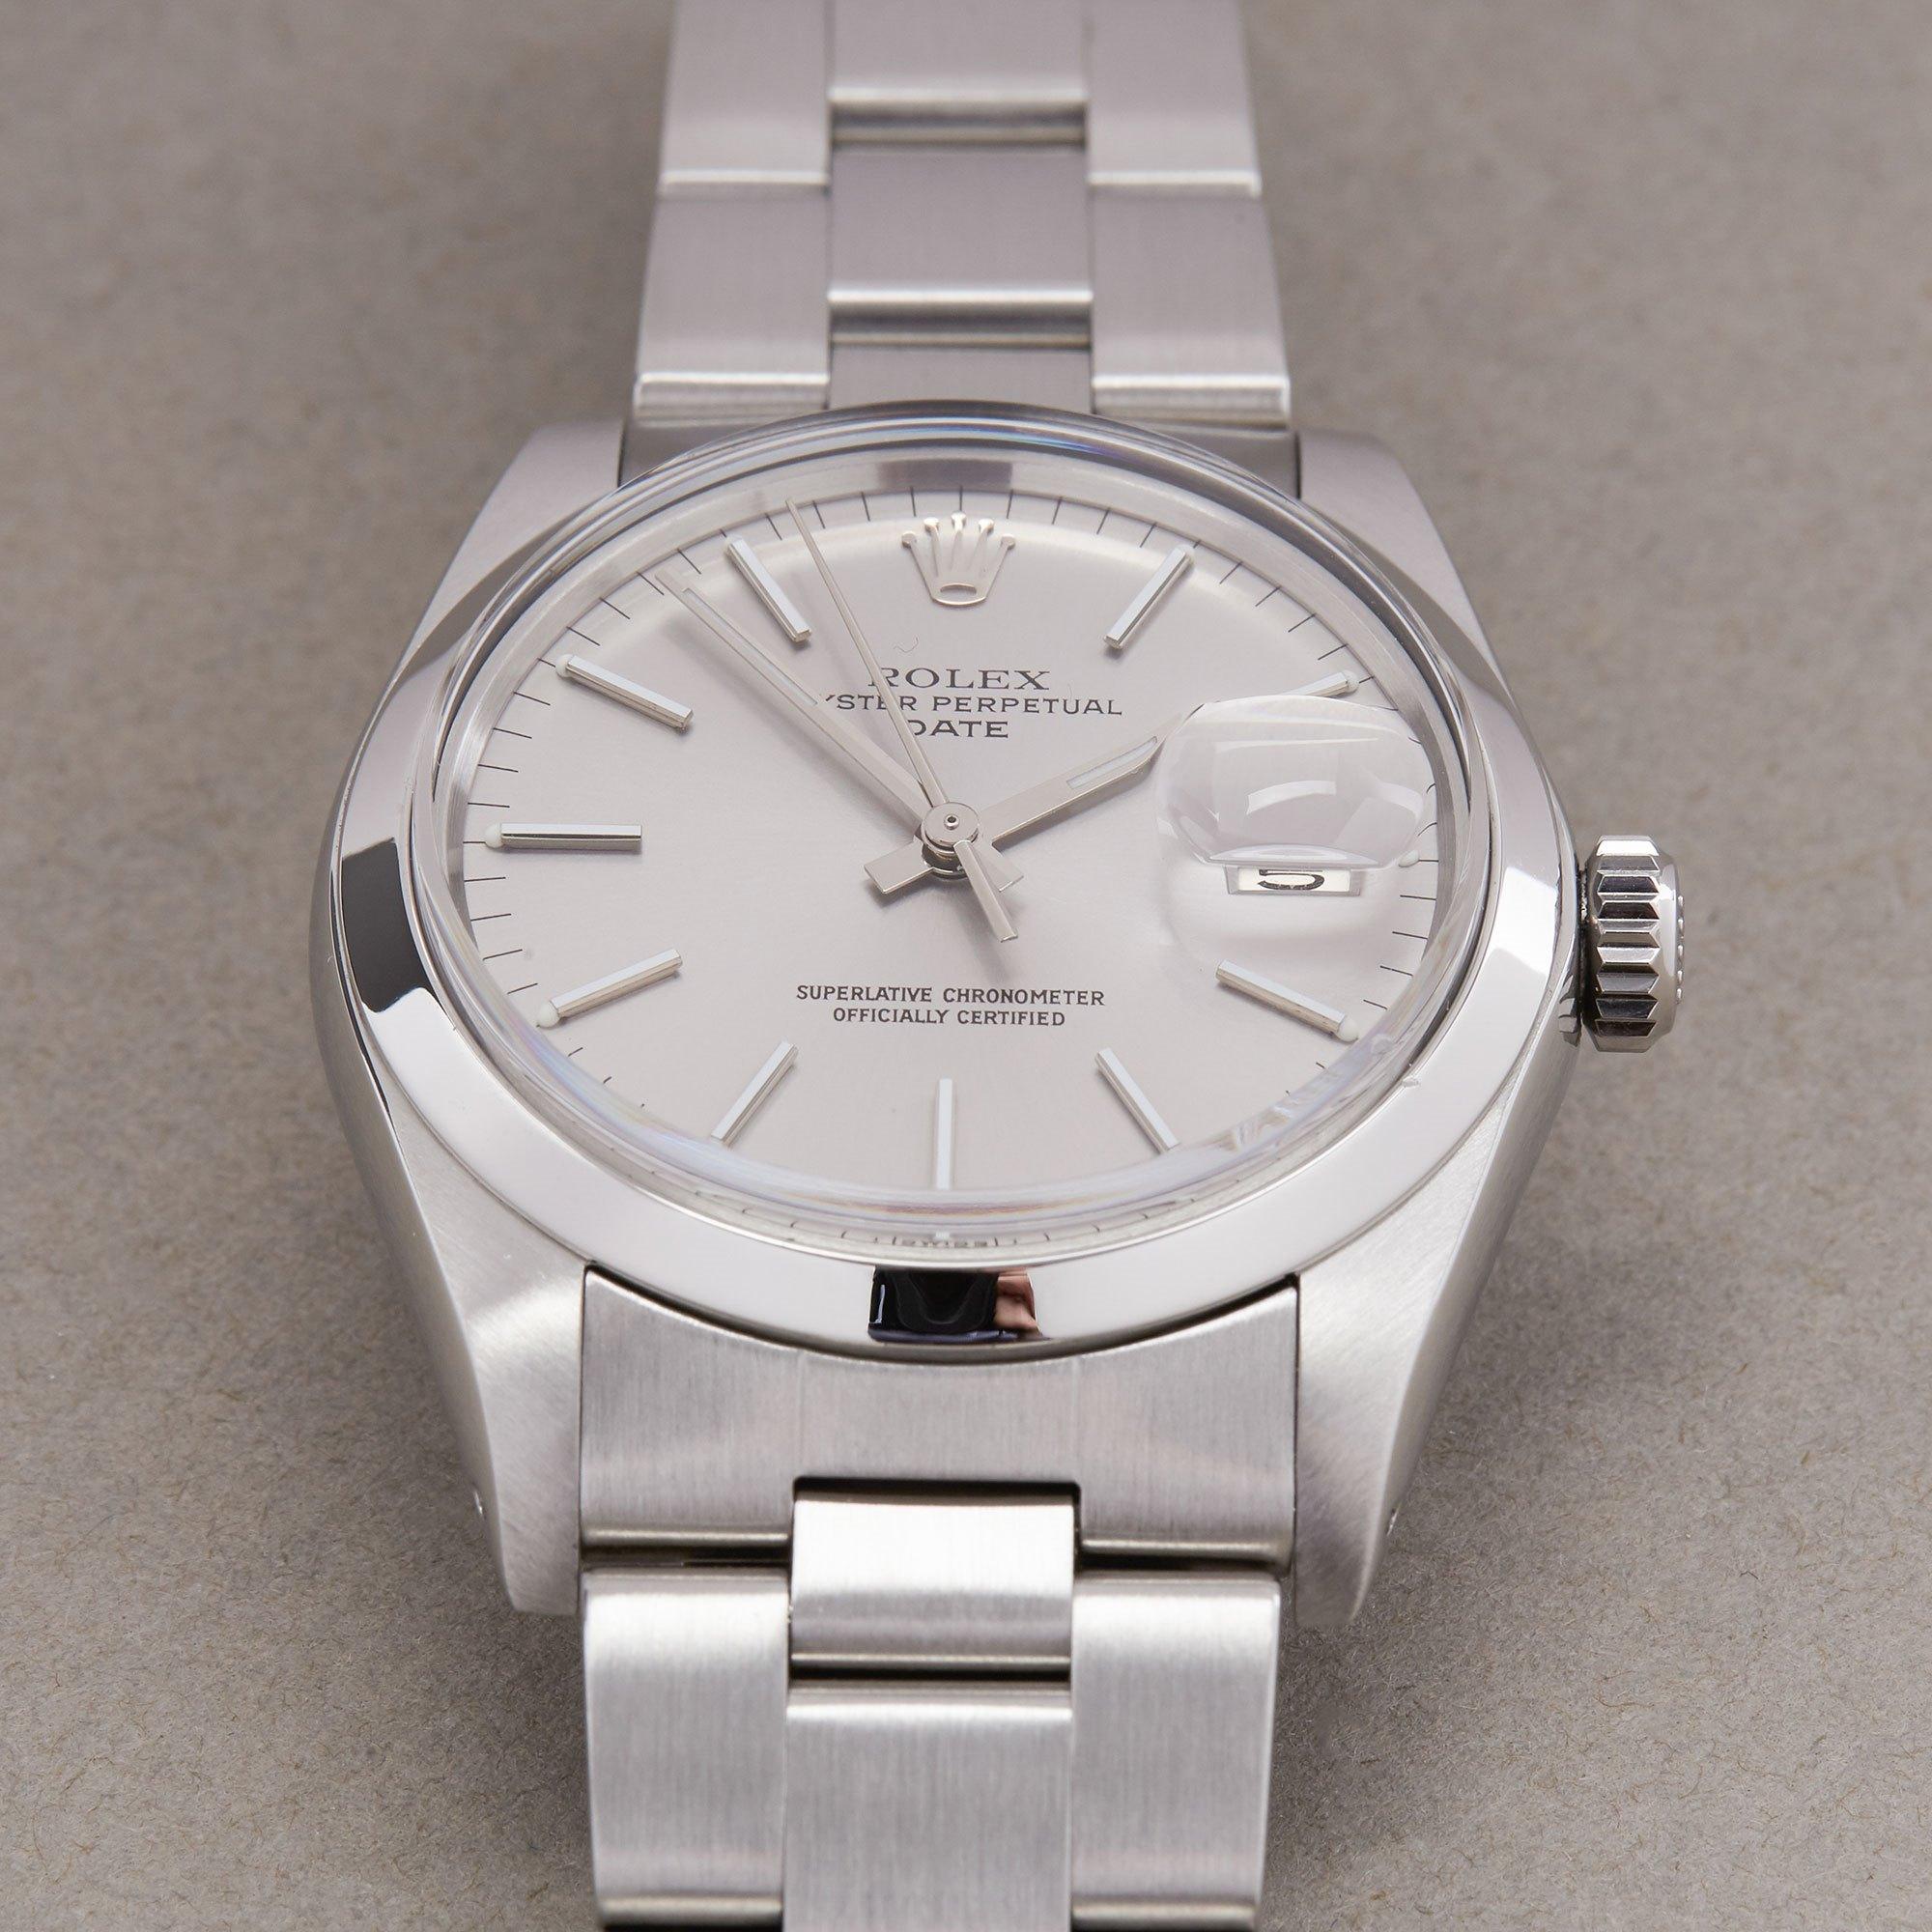 Rolex Oyster Perpetual Date 1500 Men's Stainless Steel Watch 5